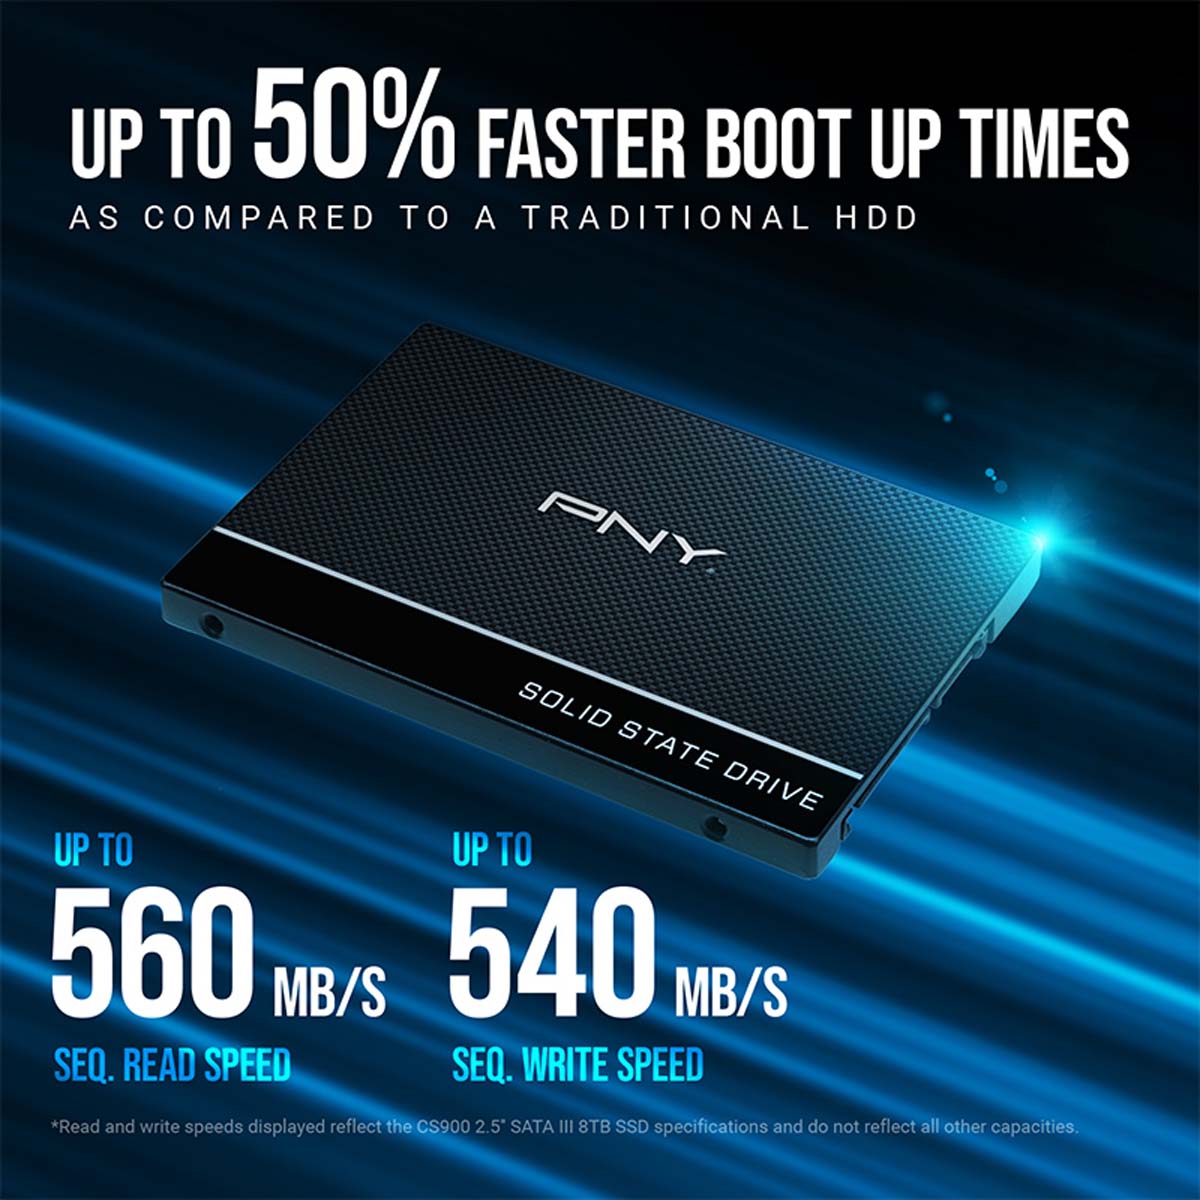 [Repacked] PNY CS900 120GB 2.5-Inch SATA III Internal SSD with 515 MB/s Read Speed and 490 MB/s Write Speed